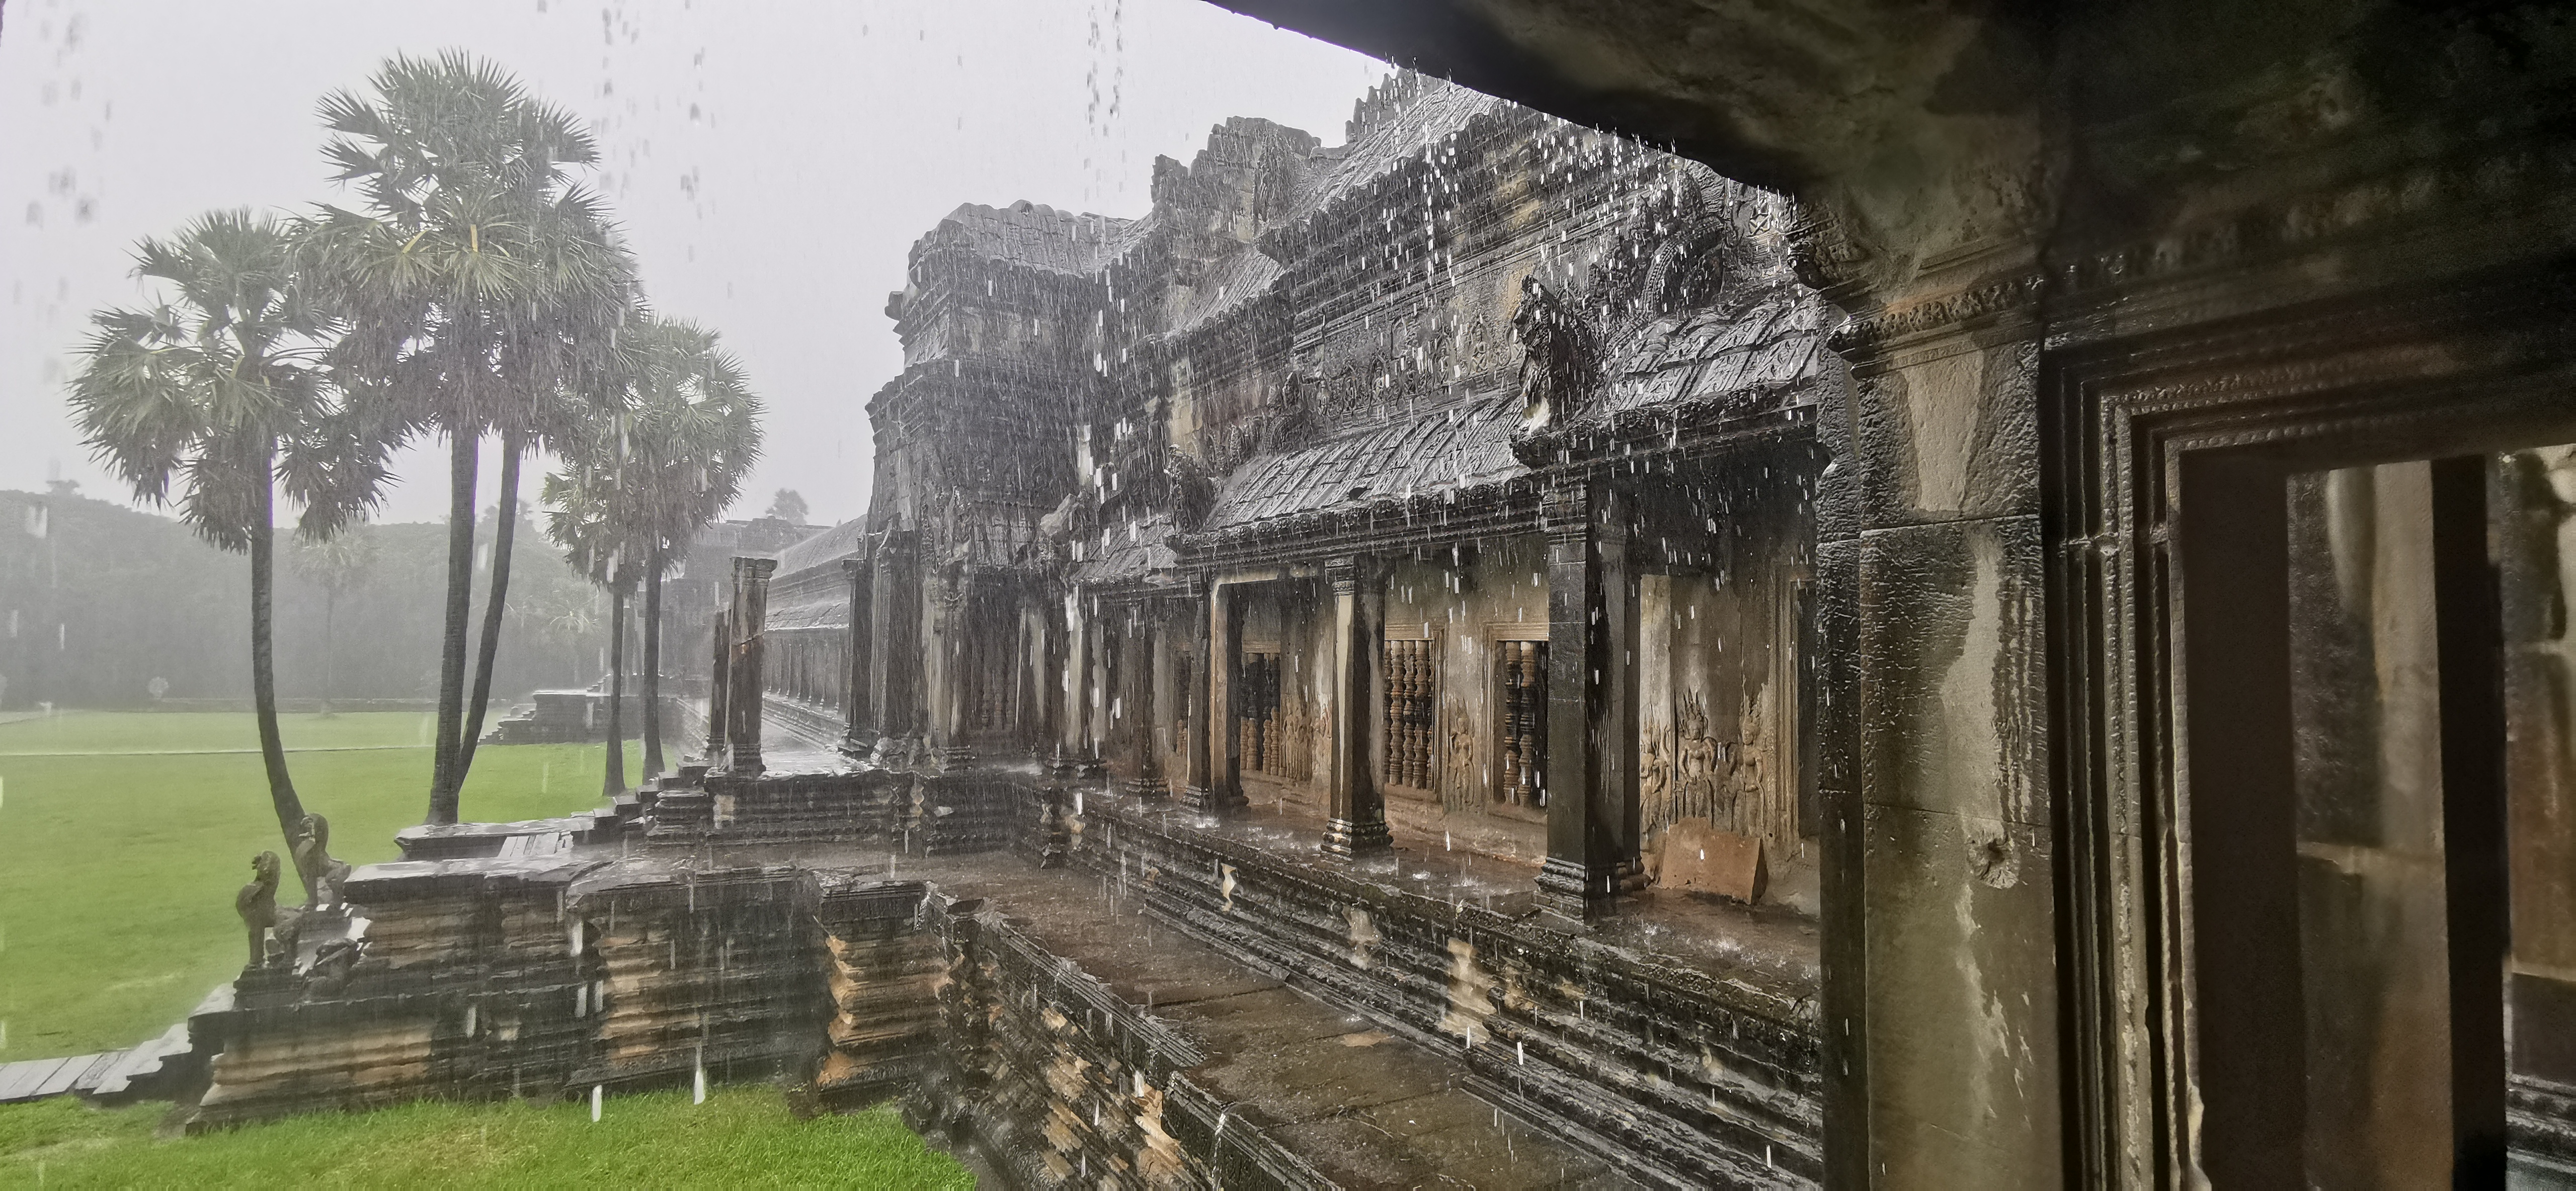 Raindrops drip from buildings in Angkor Archaeological Park in Siem Reap, Cambodia. /CGTN